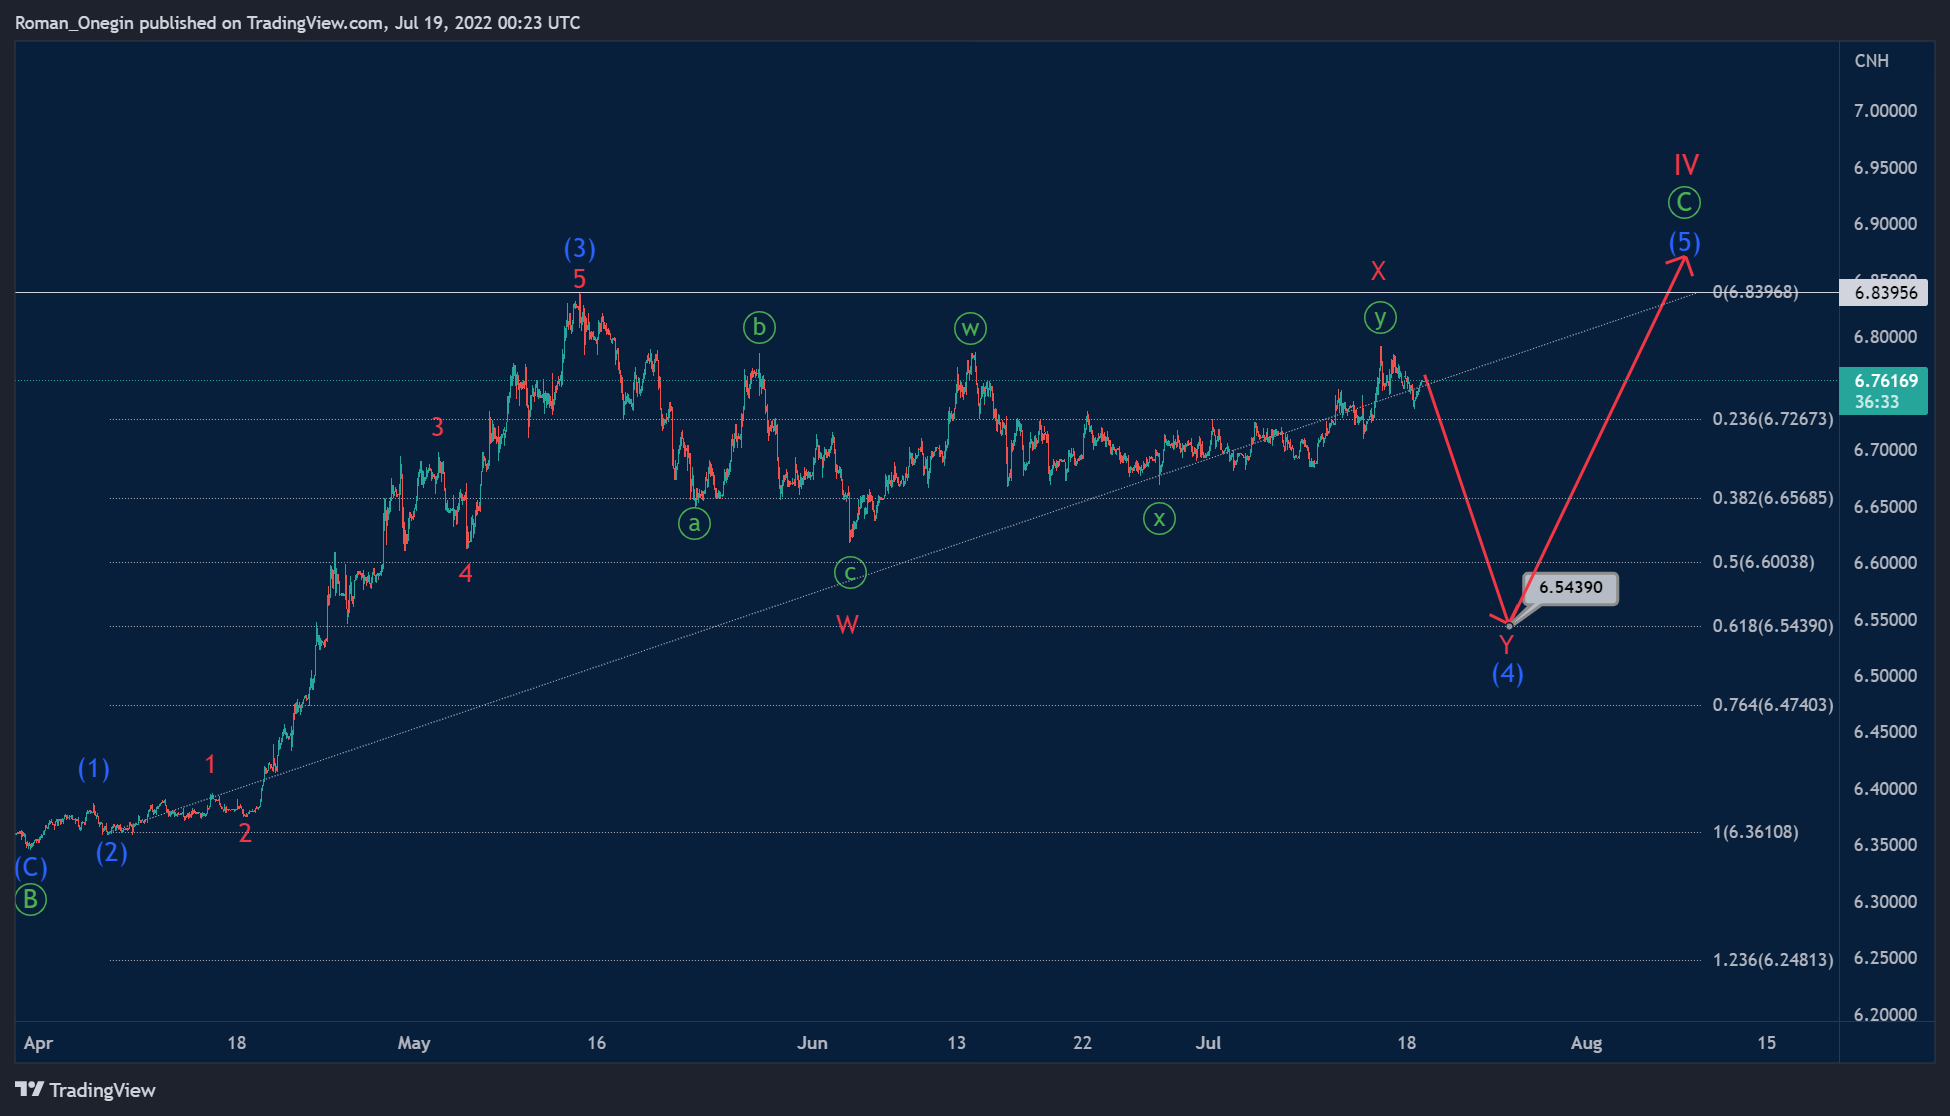 USDCNH: A Minor Wave Y Is Needed To Complete The Intermediate Correction (4) - 1